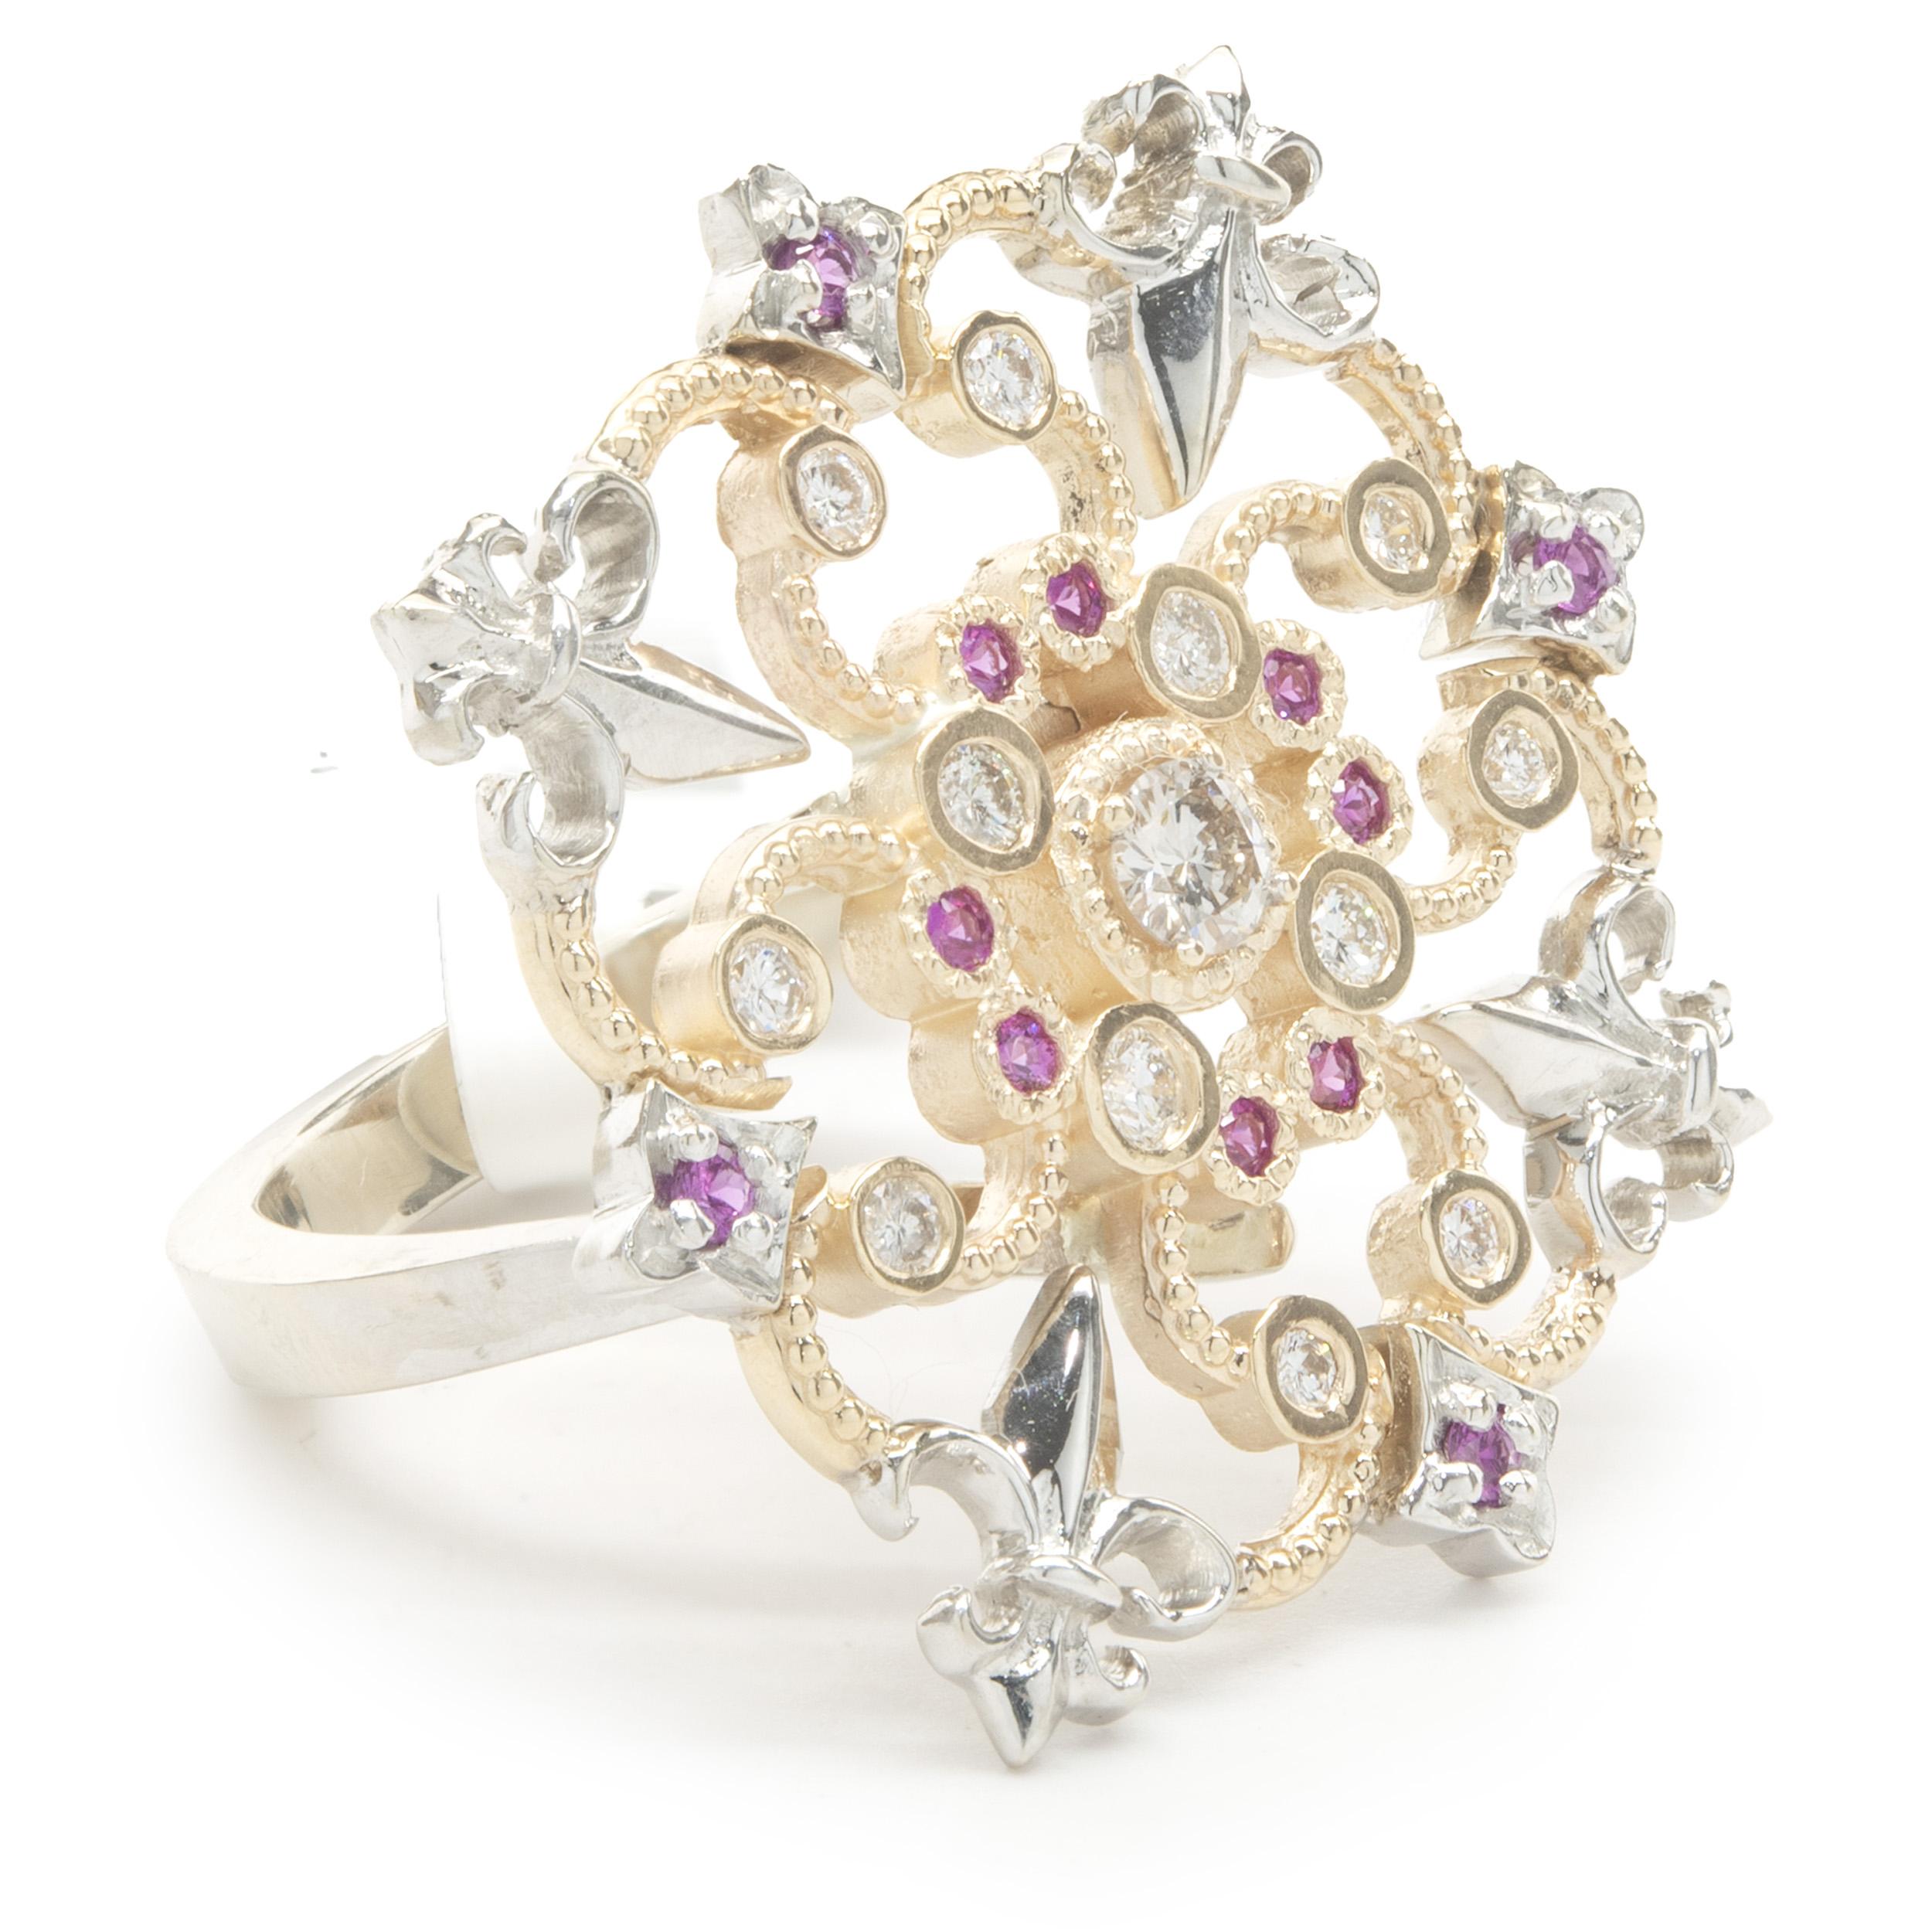 Designer: custom design
Material: 14k white and yellow gold
Pink Sapphire: 12 round cut = 0.18 carat weight
Diamonds: 13 round cut = 0.58 carat weight
Color: G
Clarity: VS
Ring Size: 7 ¼ (please allow two additional shipping days for sizing